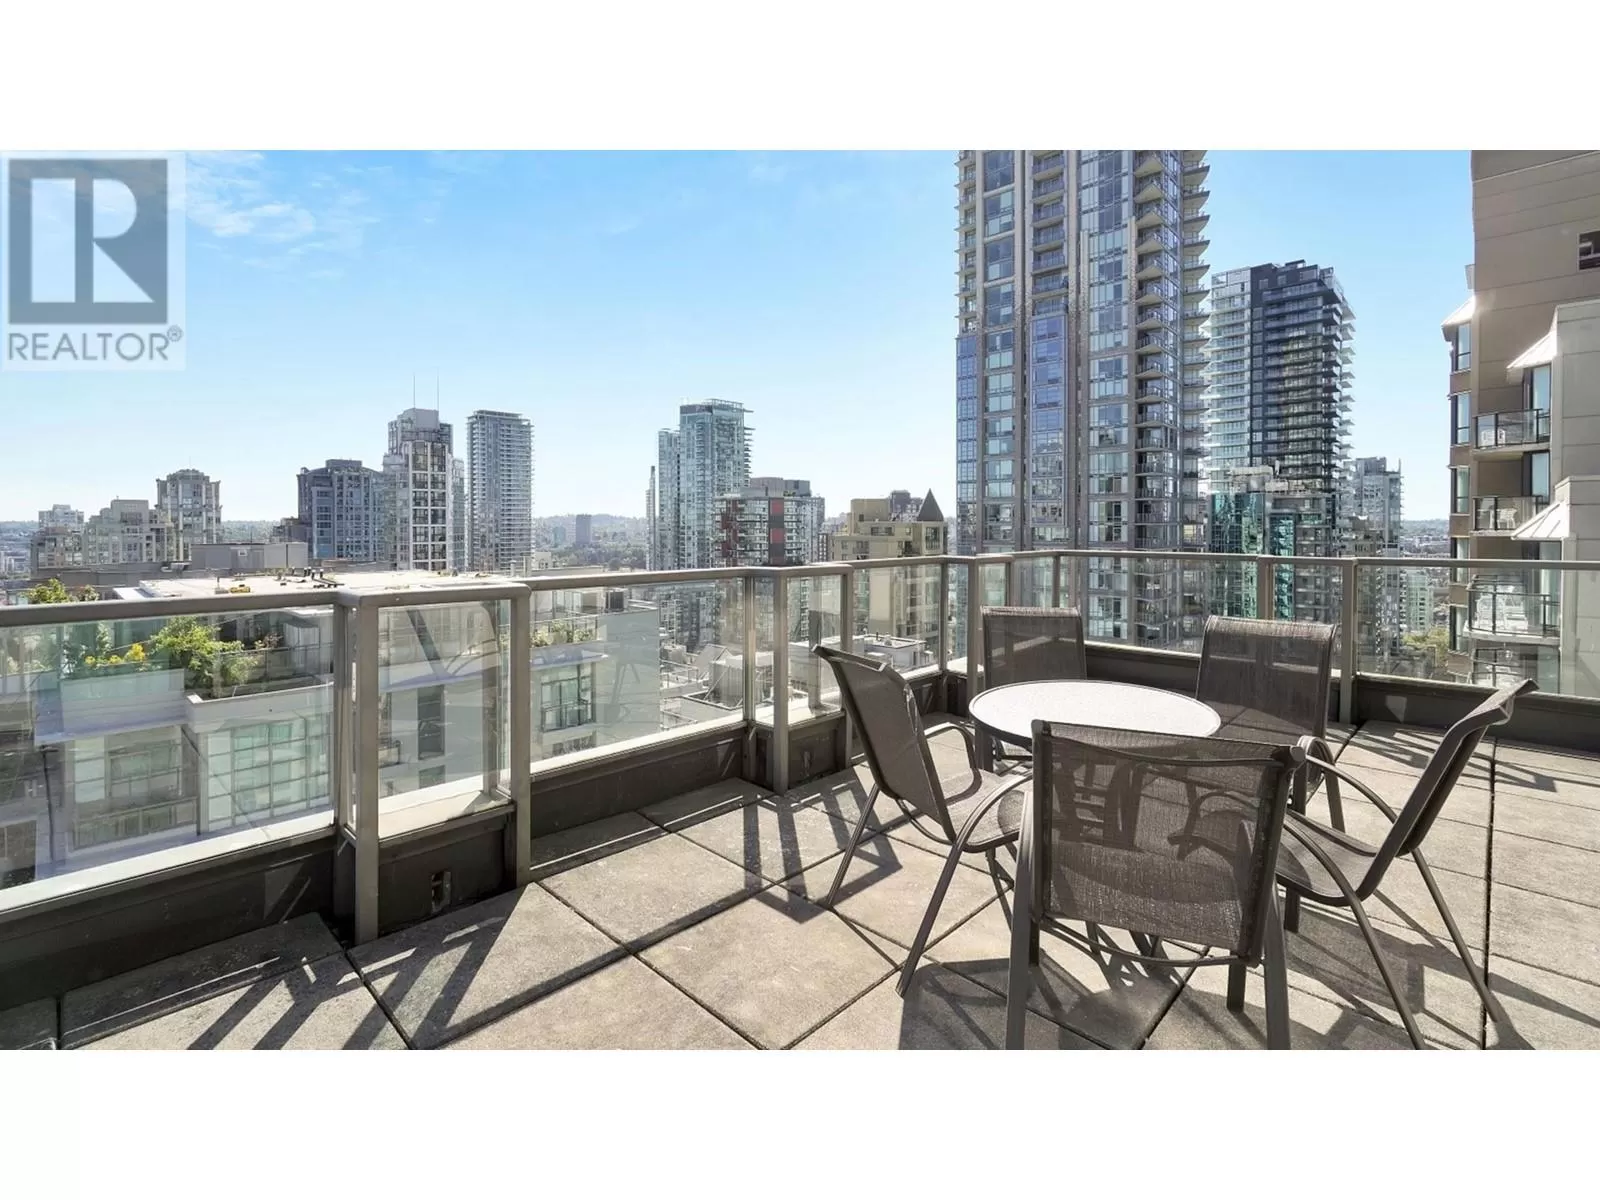 Apartment for rent: Penthouse 1200 Hornby Street, Vancouver, British Columbia V6Z 1W2